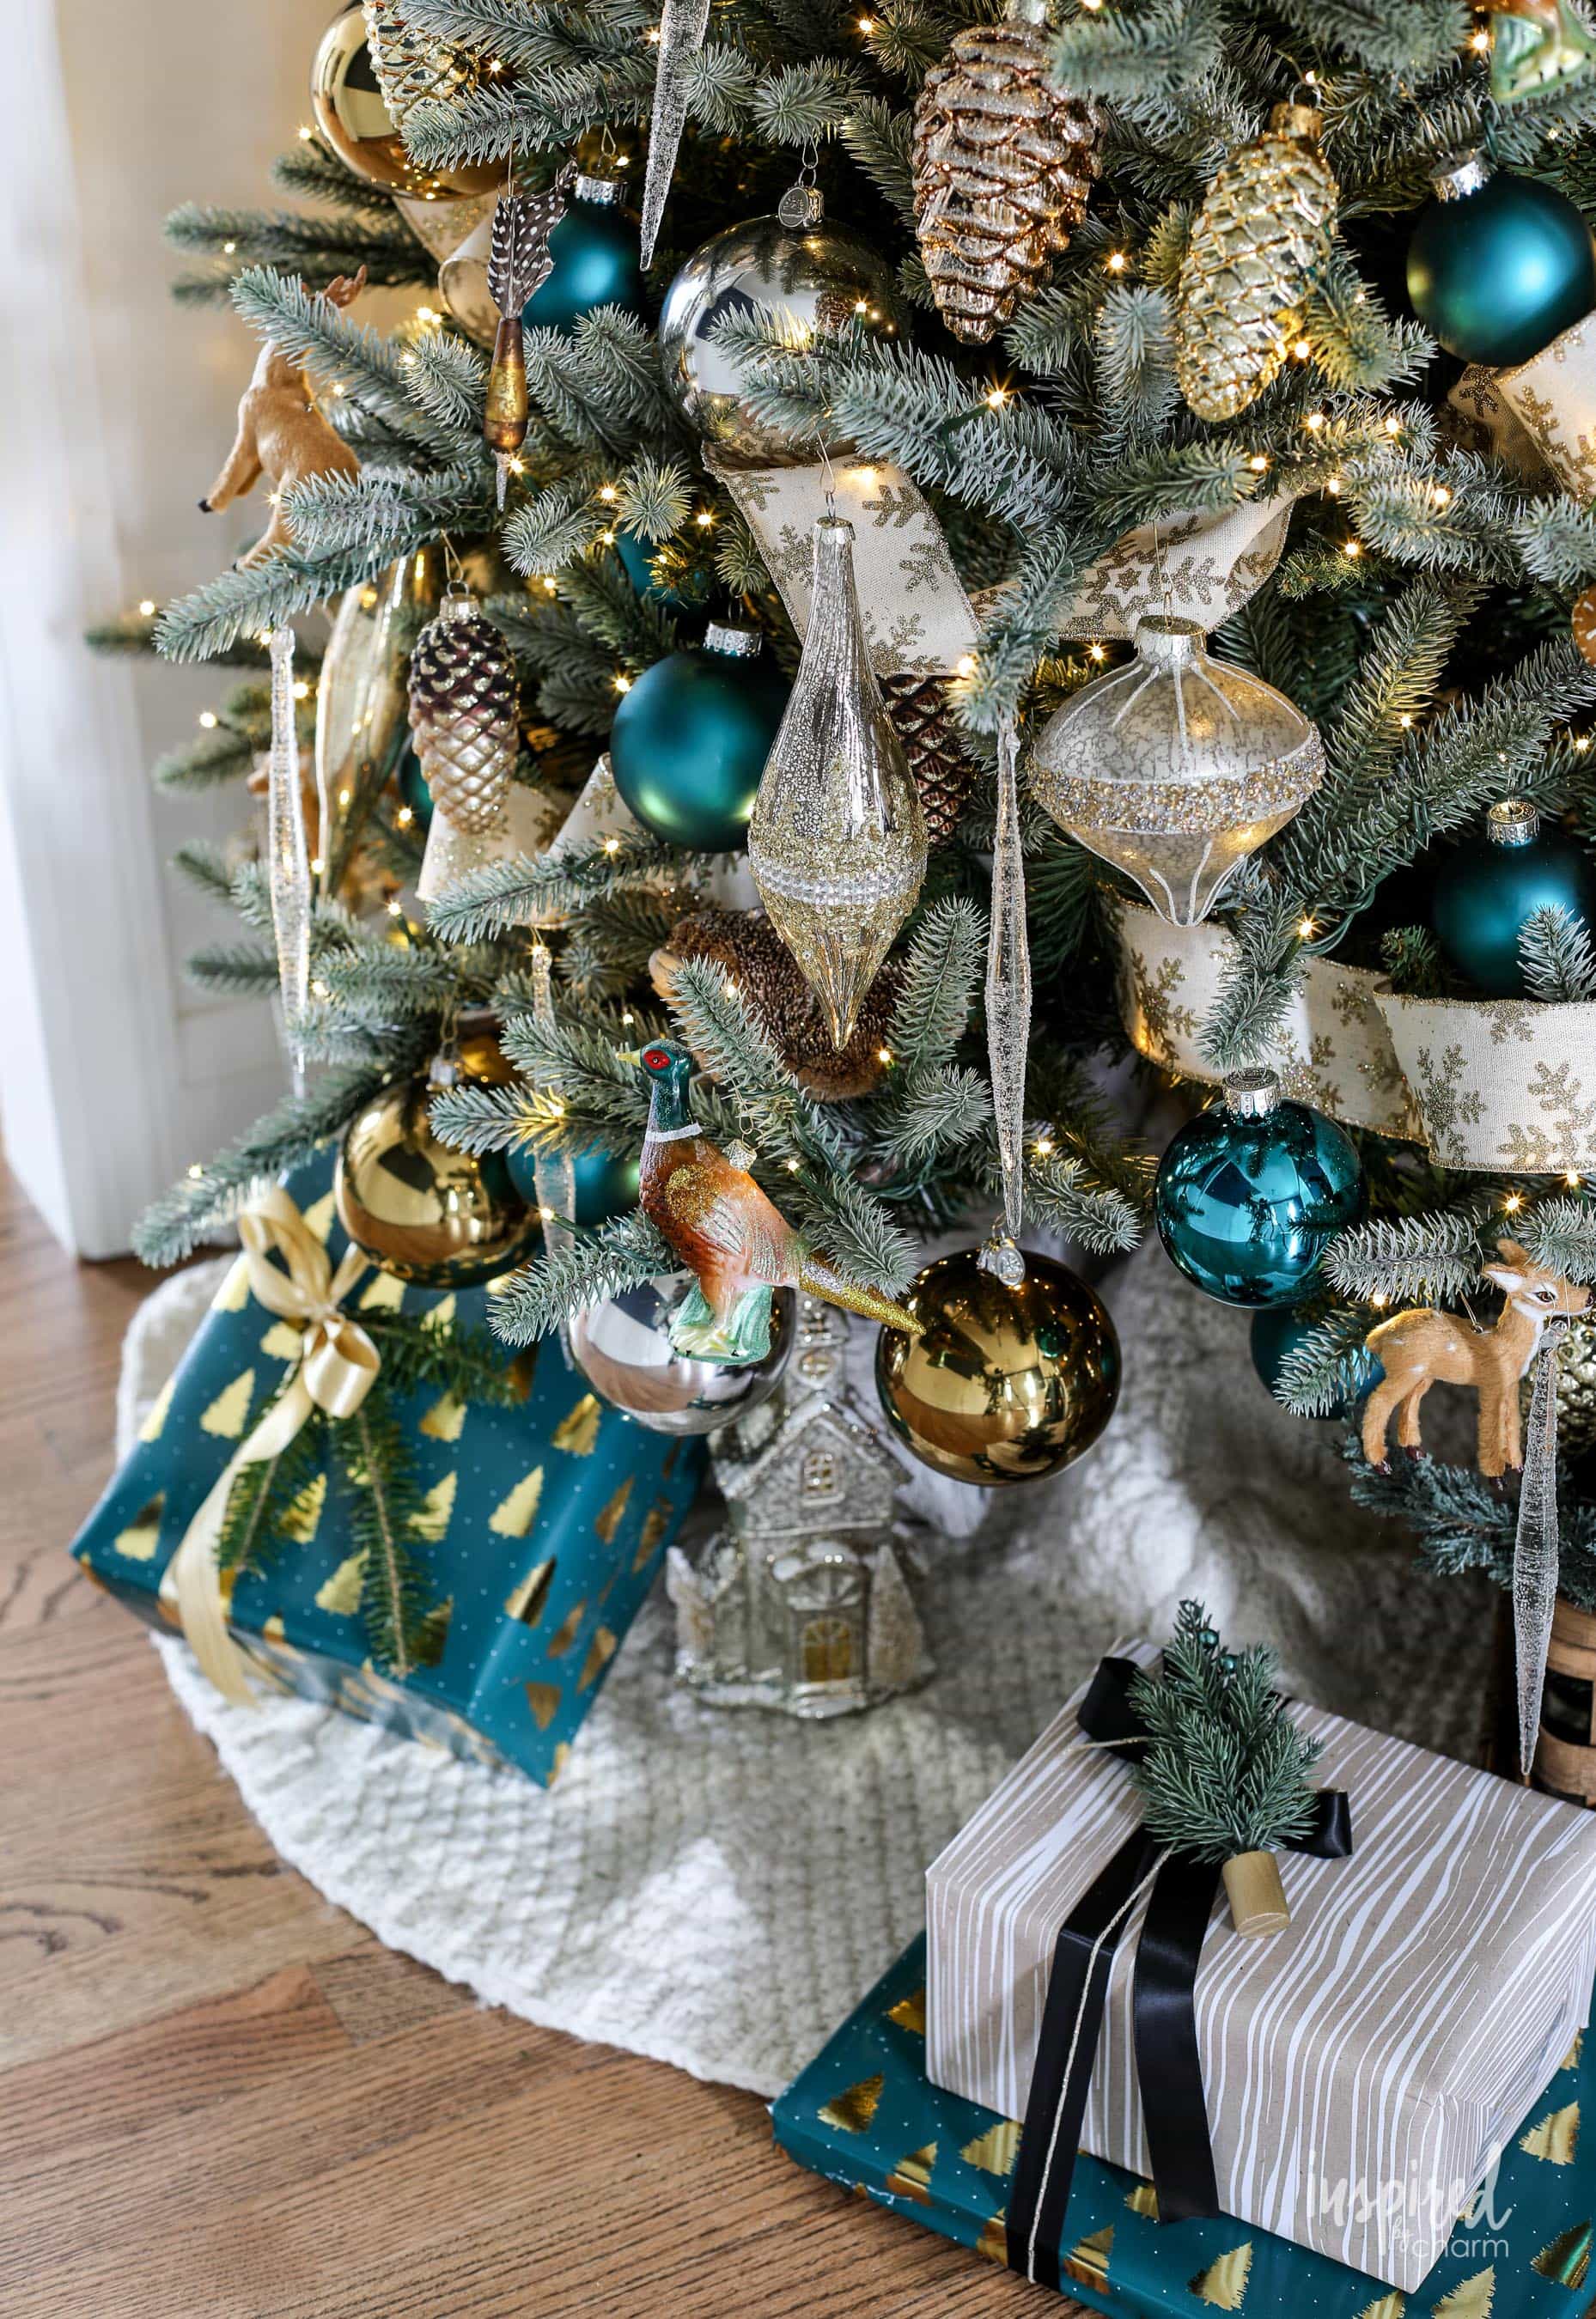 How to Decorate a Woodland Glam Christmas Tree #woodland #glam #christmas #tree #decor #holiday #decorating #christmastree